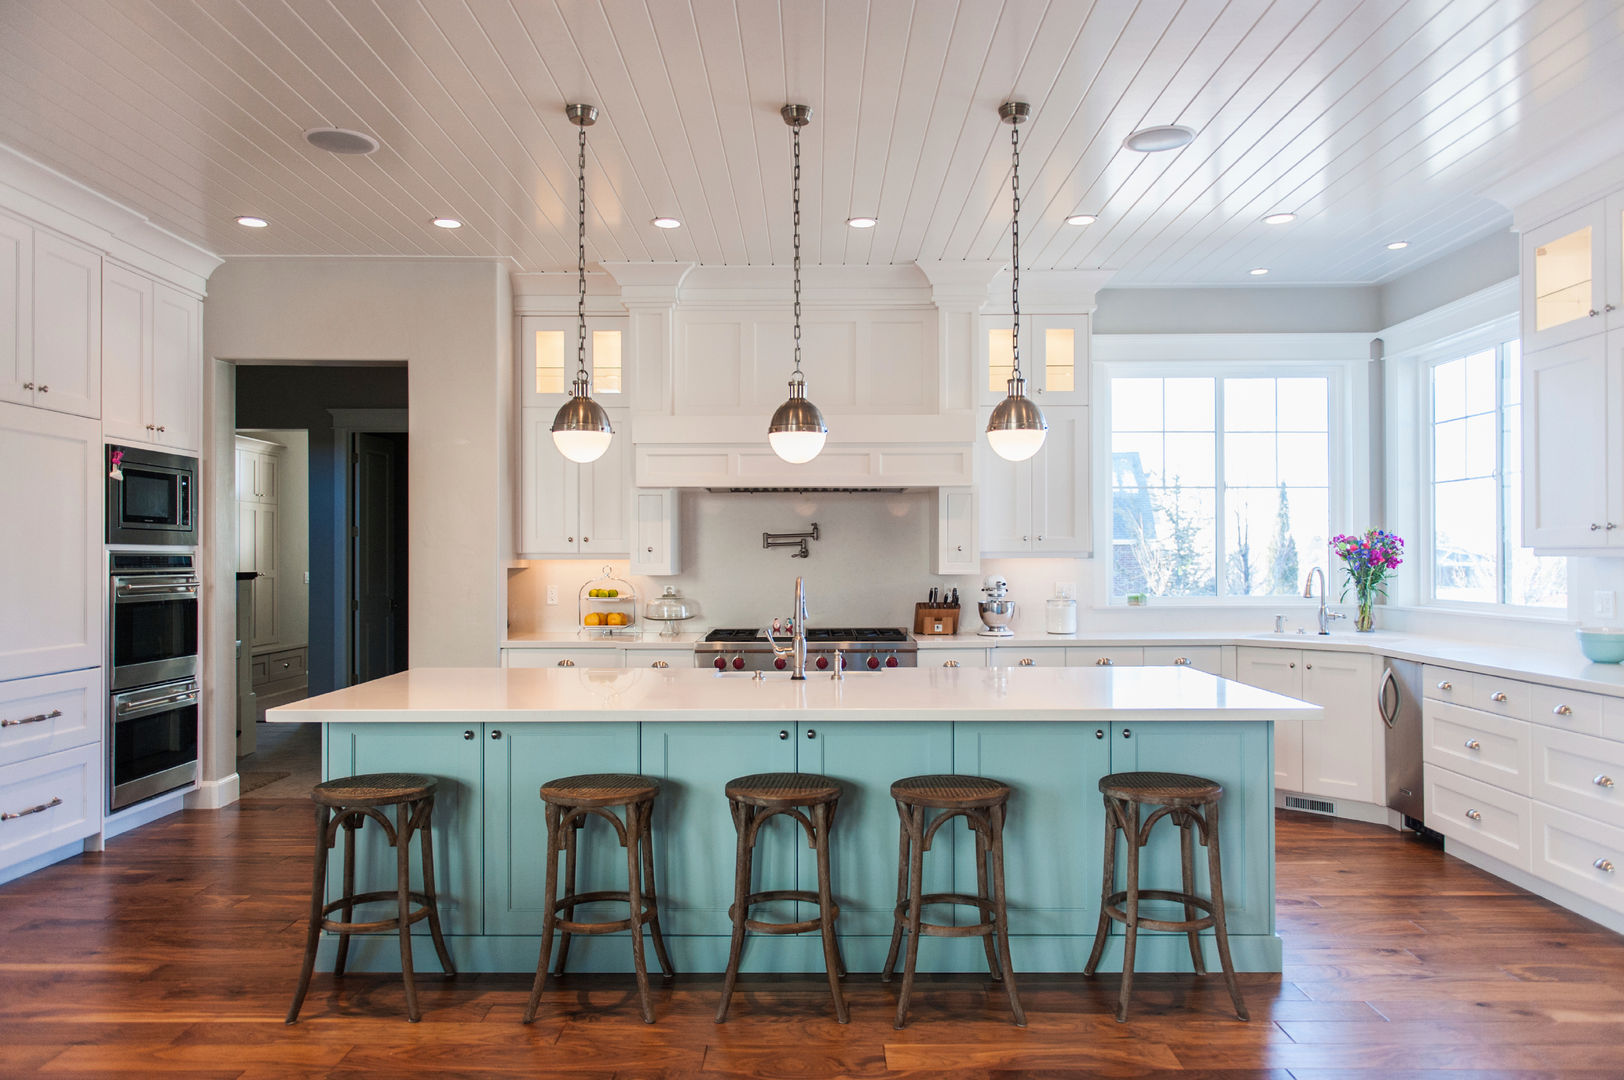 Modern Country-Style Kitchen Gracious Luxury Interiors Кухня Country,Kitchen,Kitchen Island,Pastel,Blue,Barn,Barn Conversion